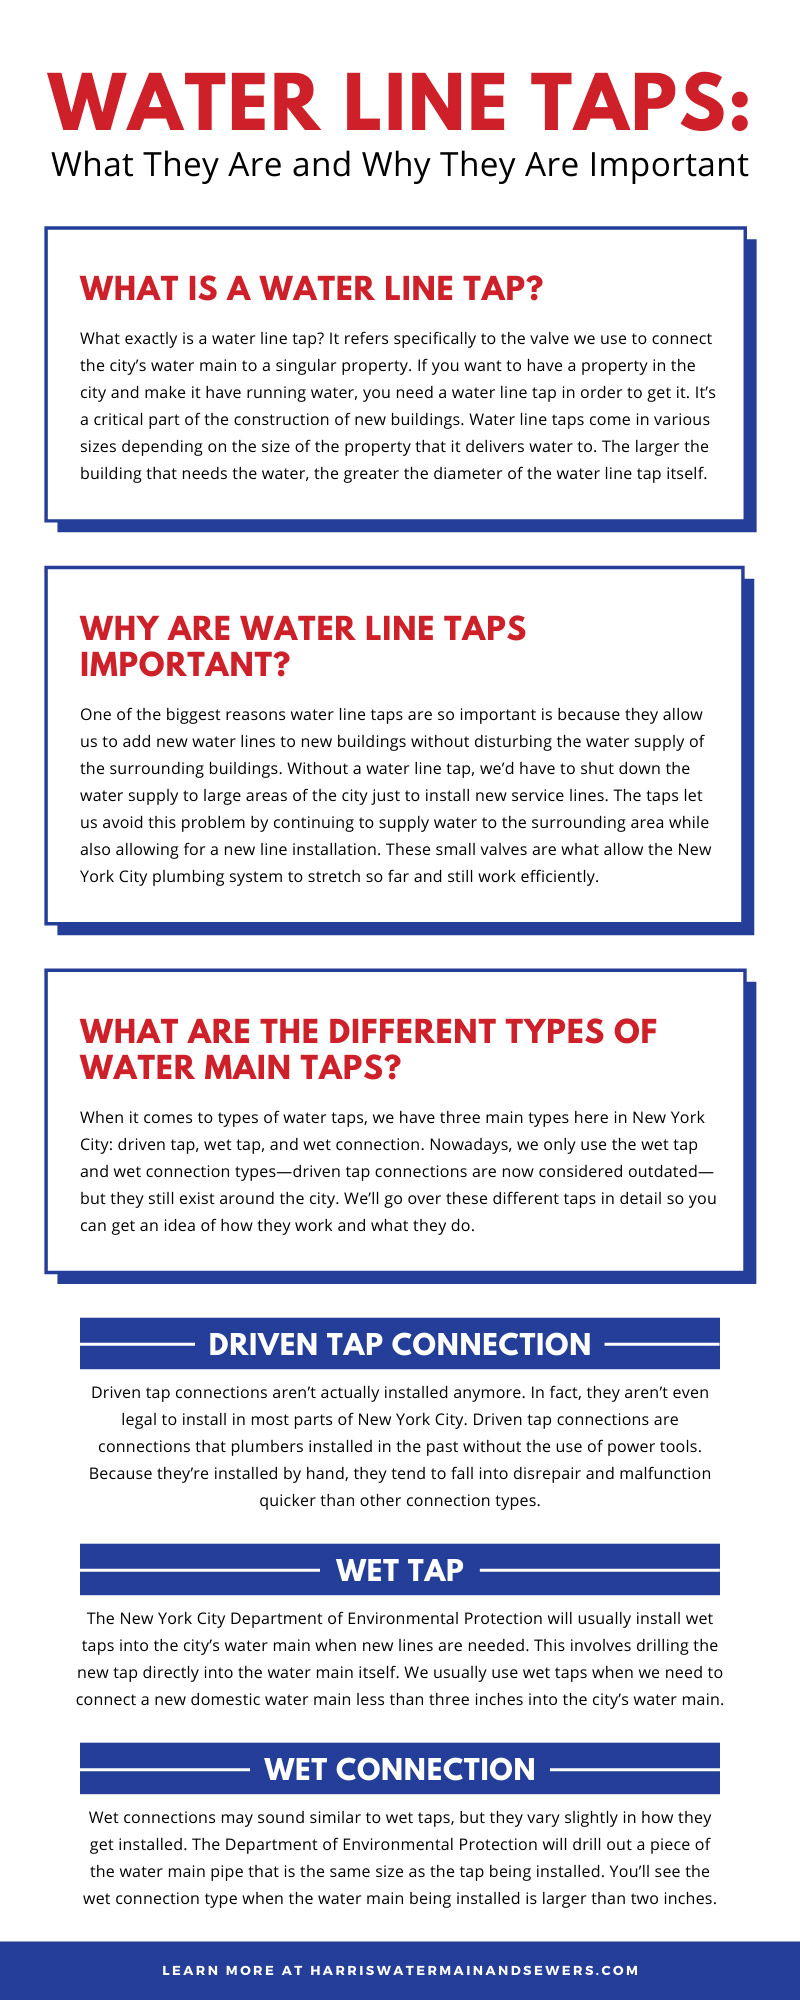 Water Line Taps: What They Are and Why They Are Important